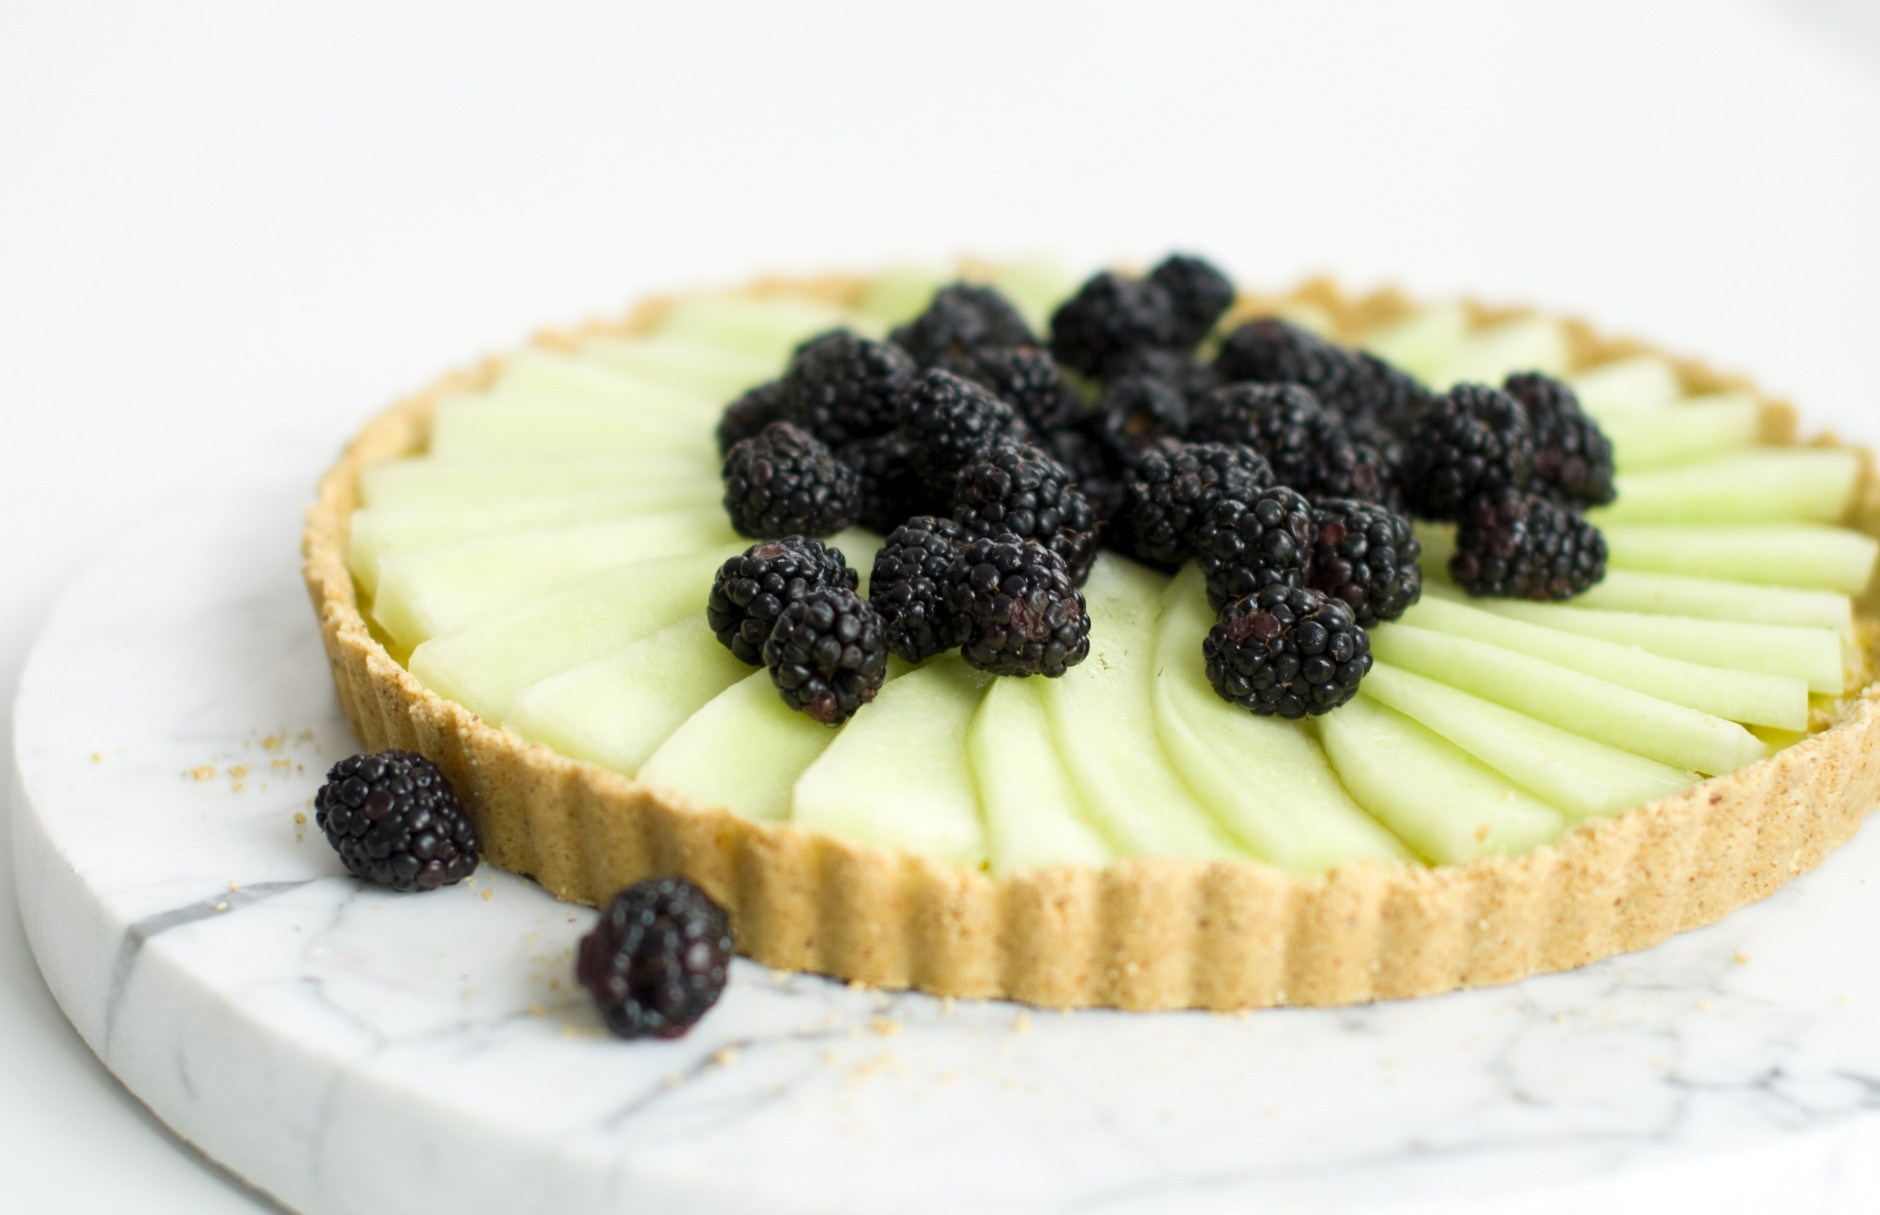 This March 15, 2011 photo shows a honeydew-blackberry tart in Concord, N.H. This tart offers a nice balance between light and luxurious.   (AP Photo/Matthew Mead)